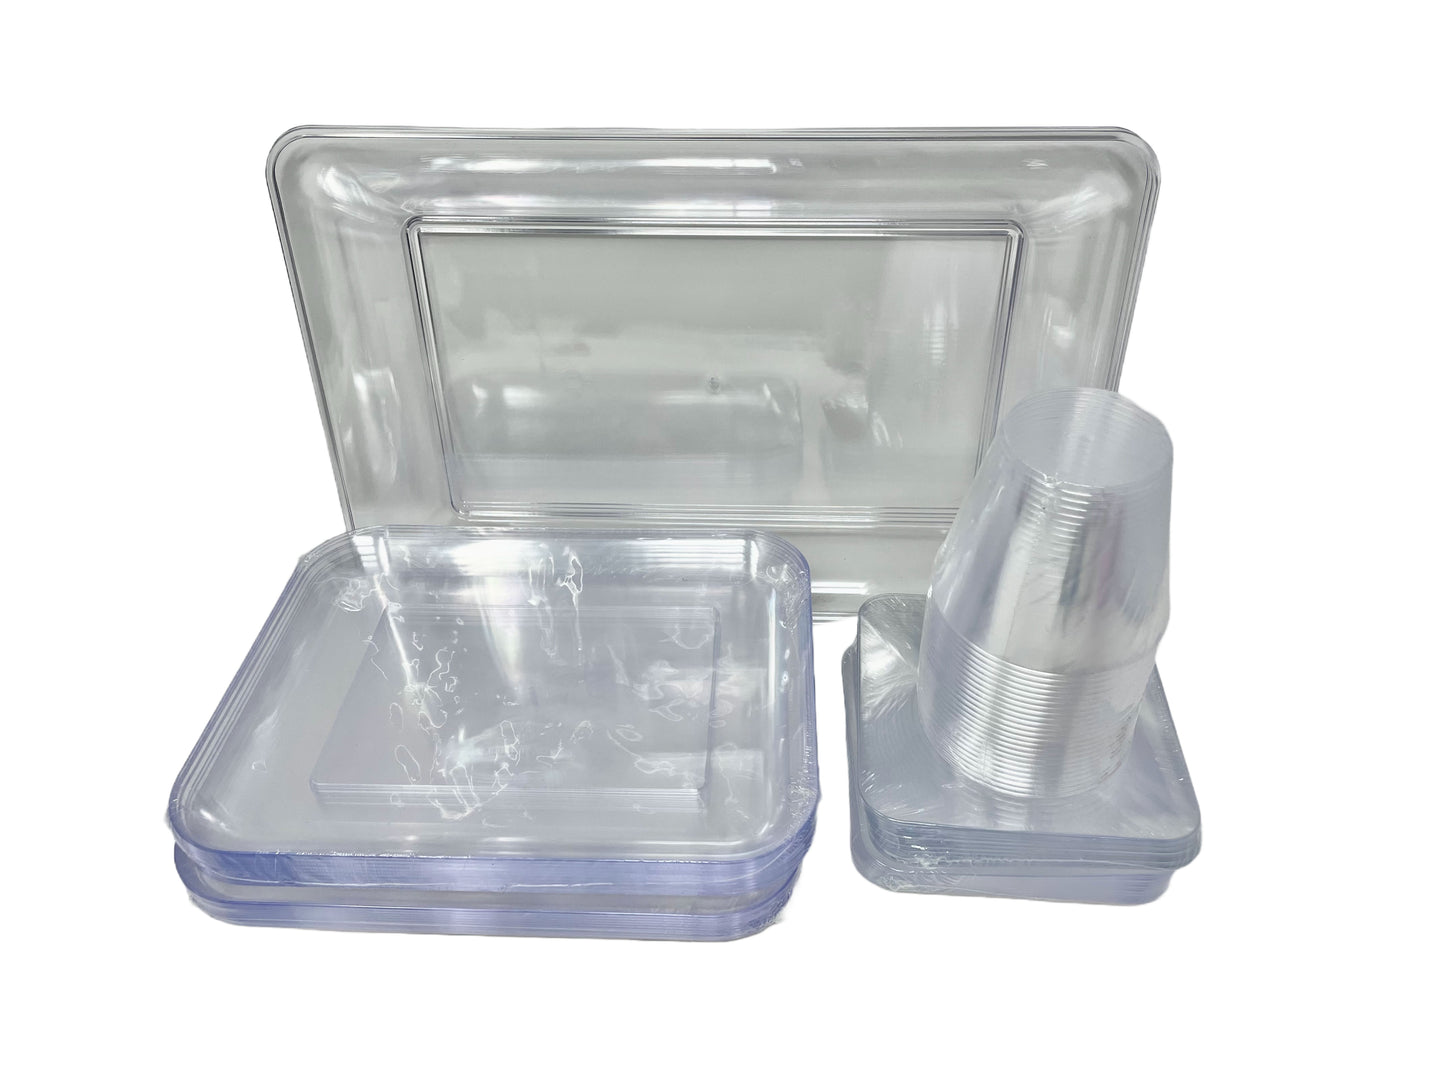 Clear Holiday Partyware Set - Serves Up To 20 - 90 Pc Set